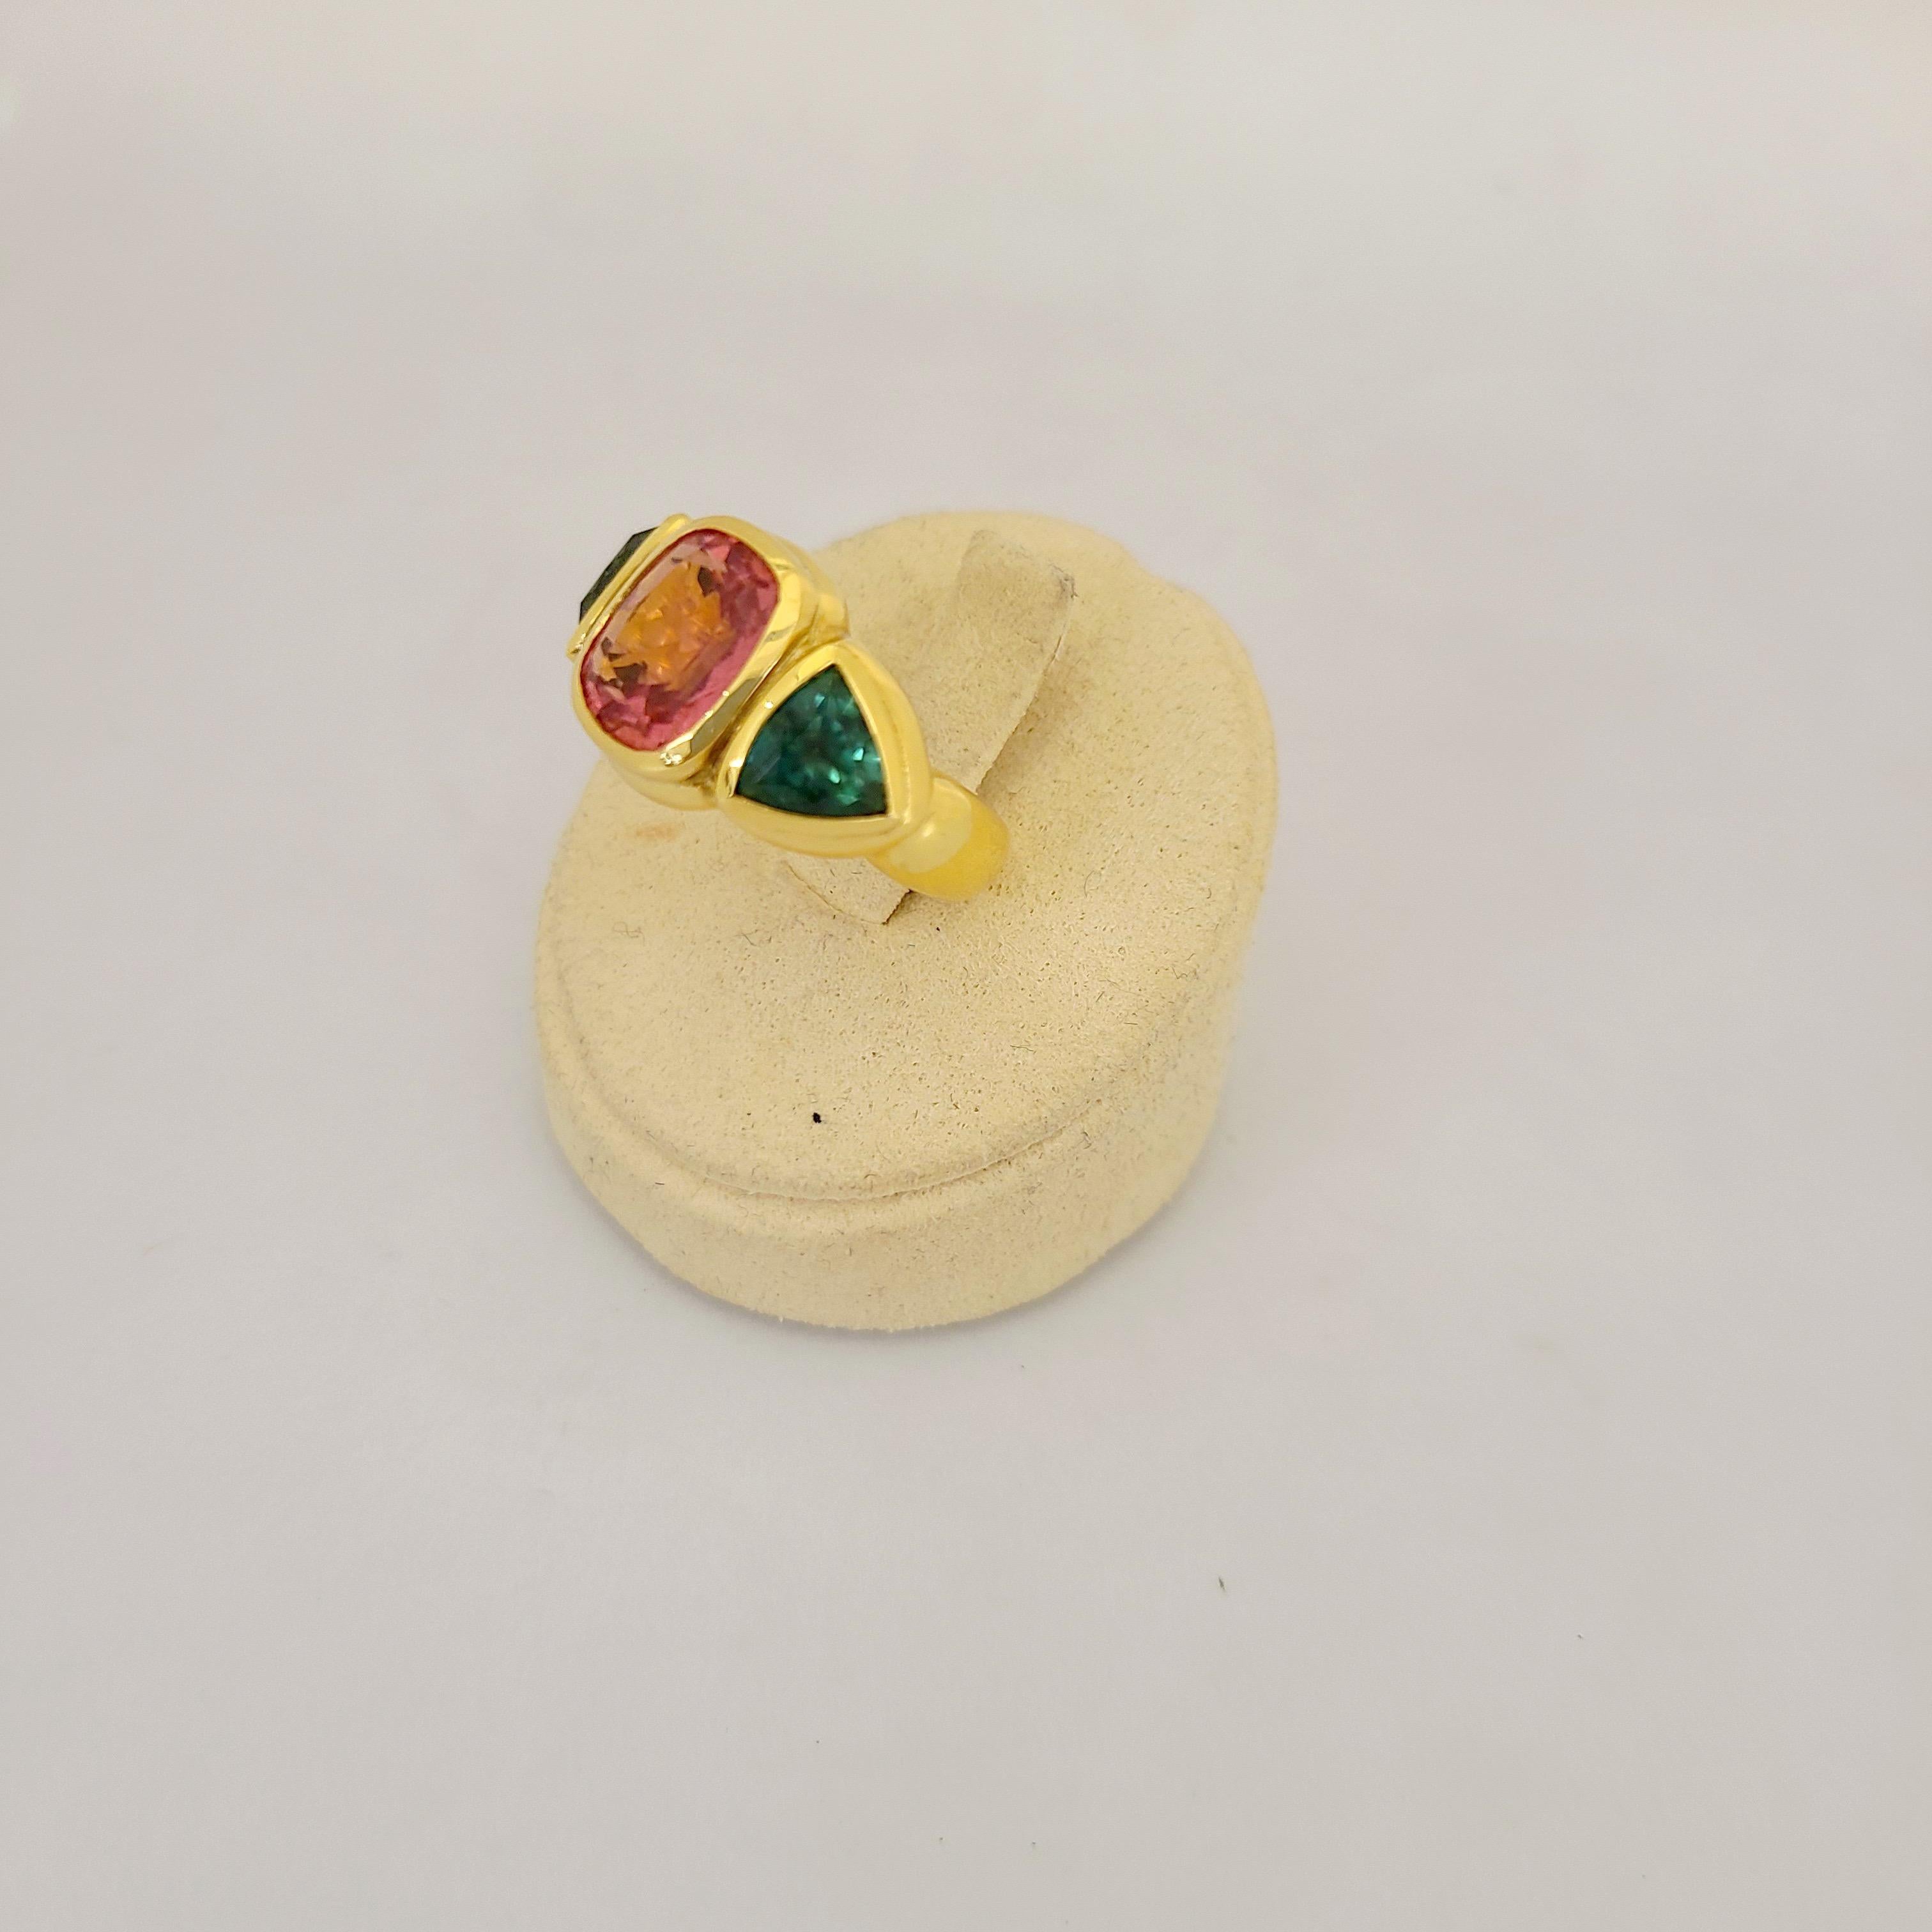 Cellini 18 Karat Yellow Gold 6.63 Carat Rubellite and Green Tourmaline Ring In New Condition For Sale In New York, NY